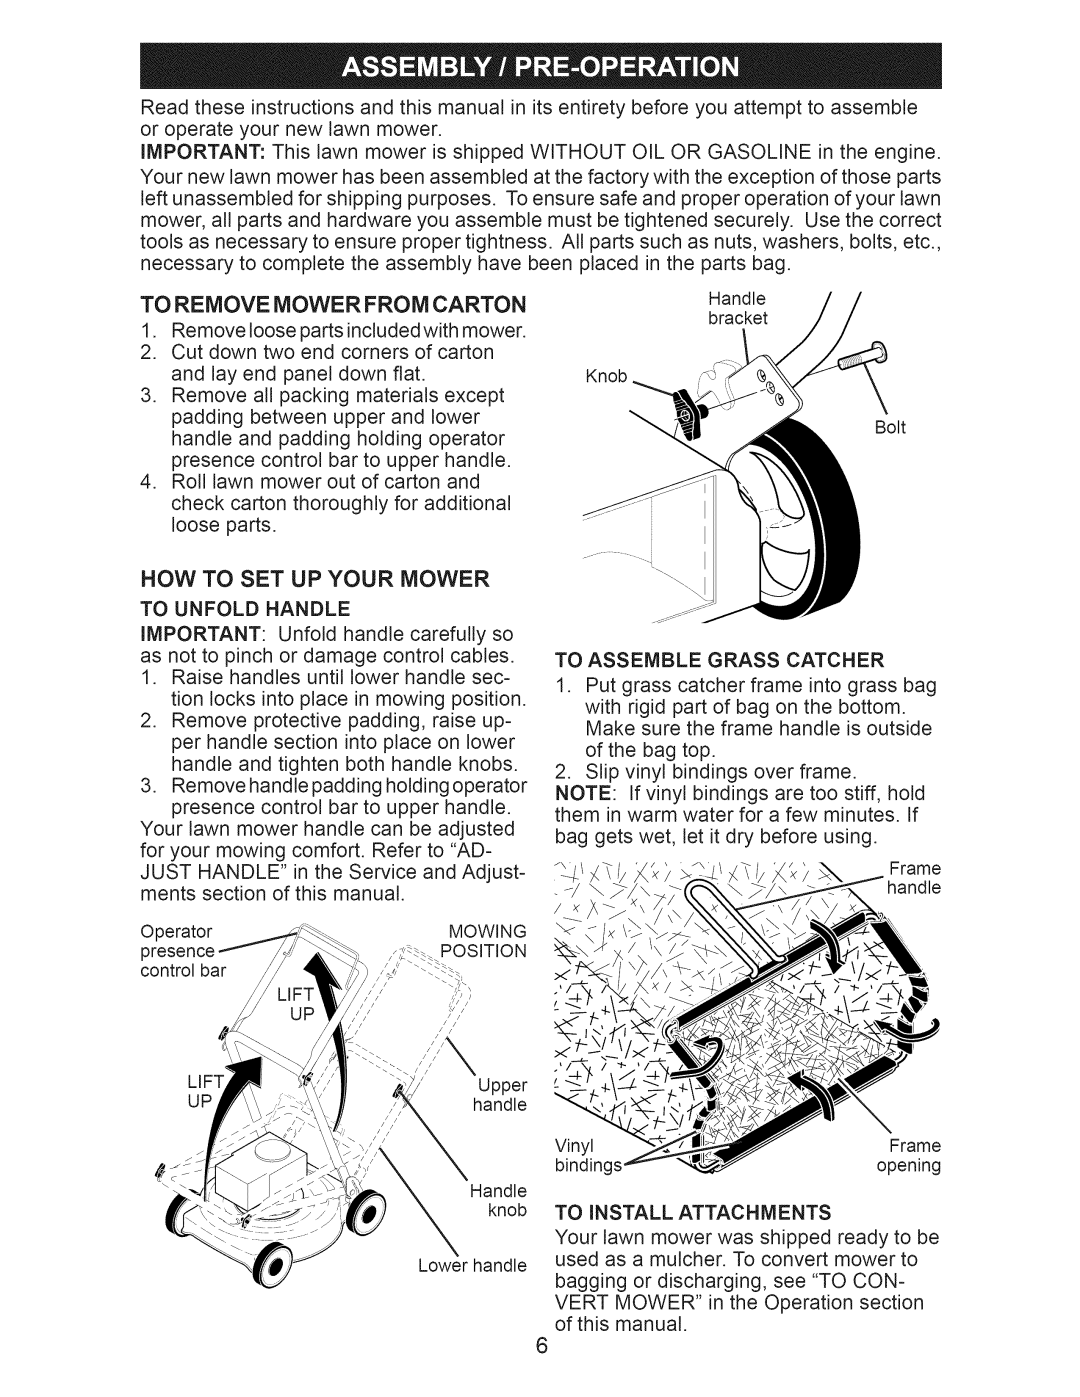 Craftsman 917.376392 manual To Remove Mower From Carton, Now To Set Up Your Mower 